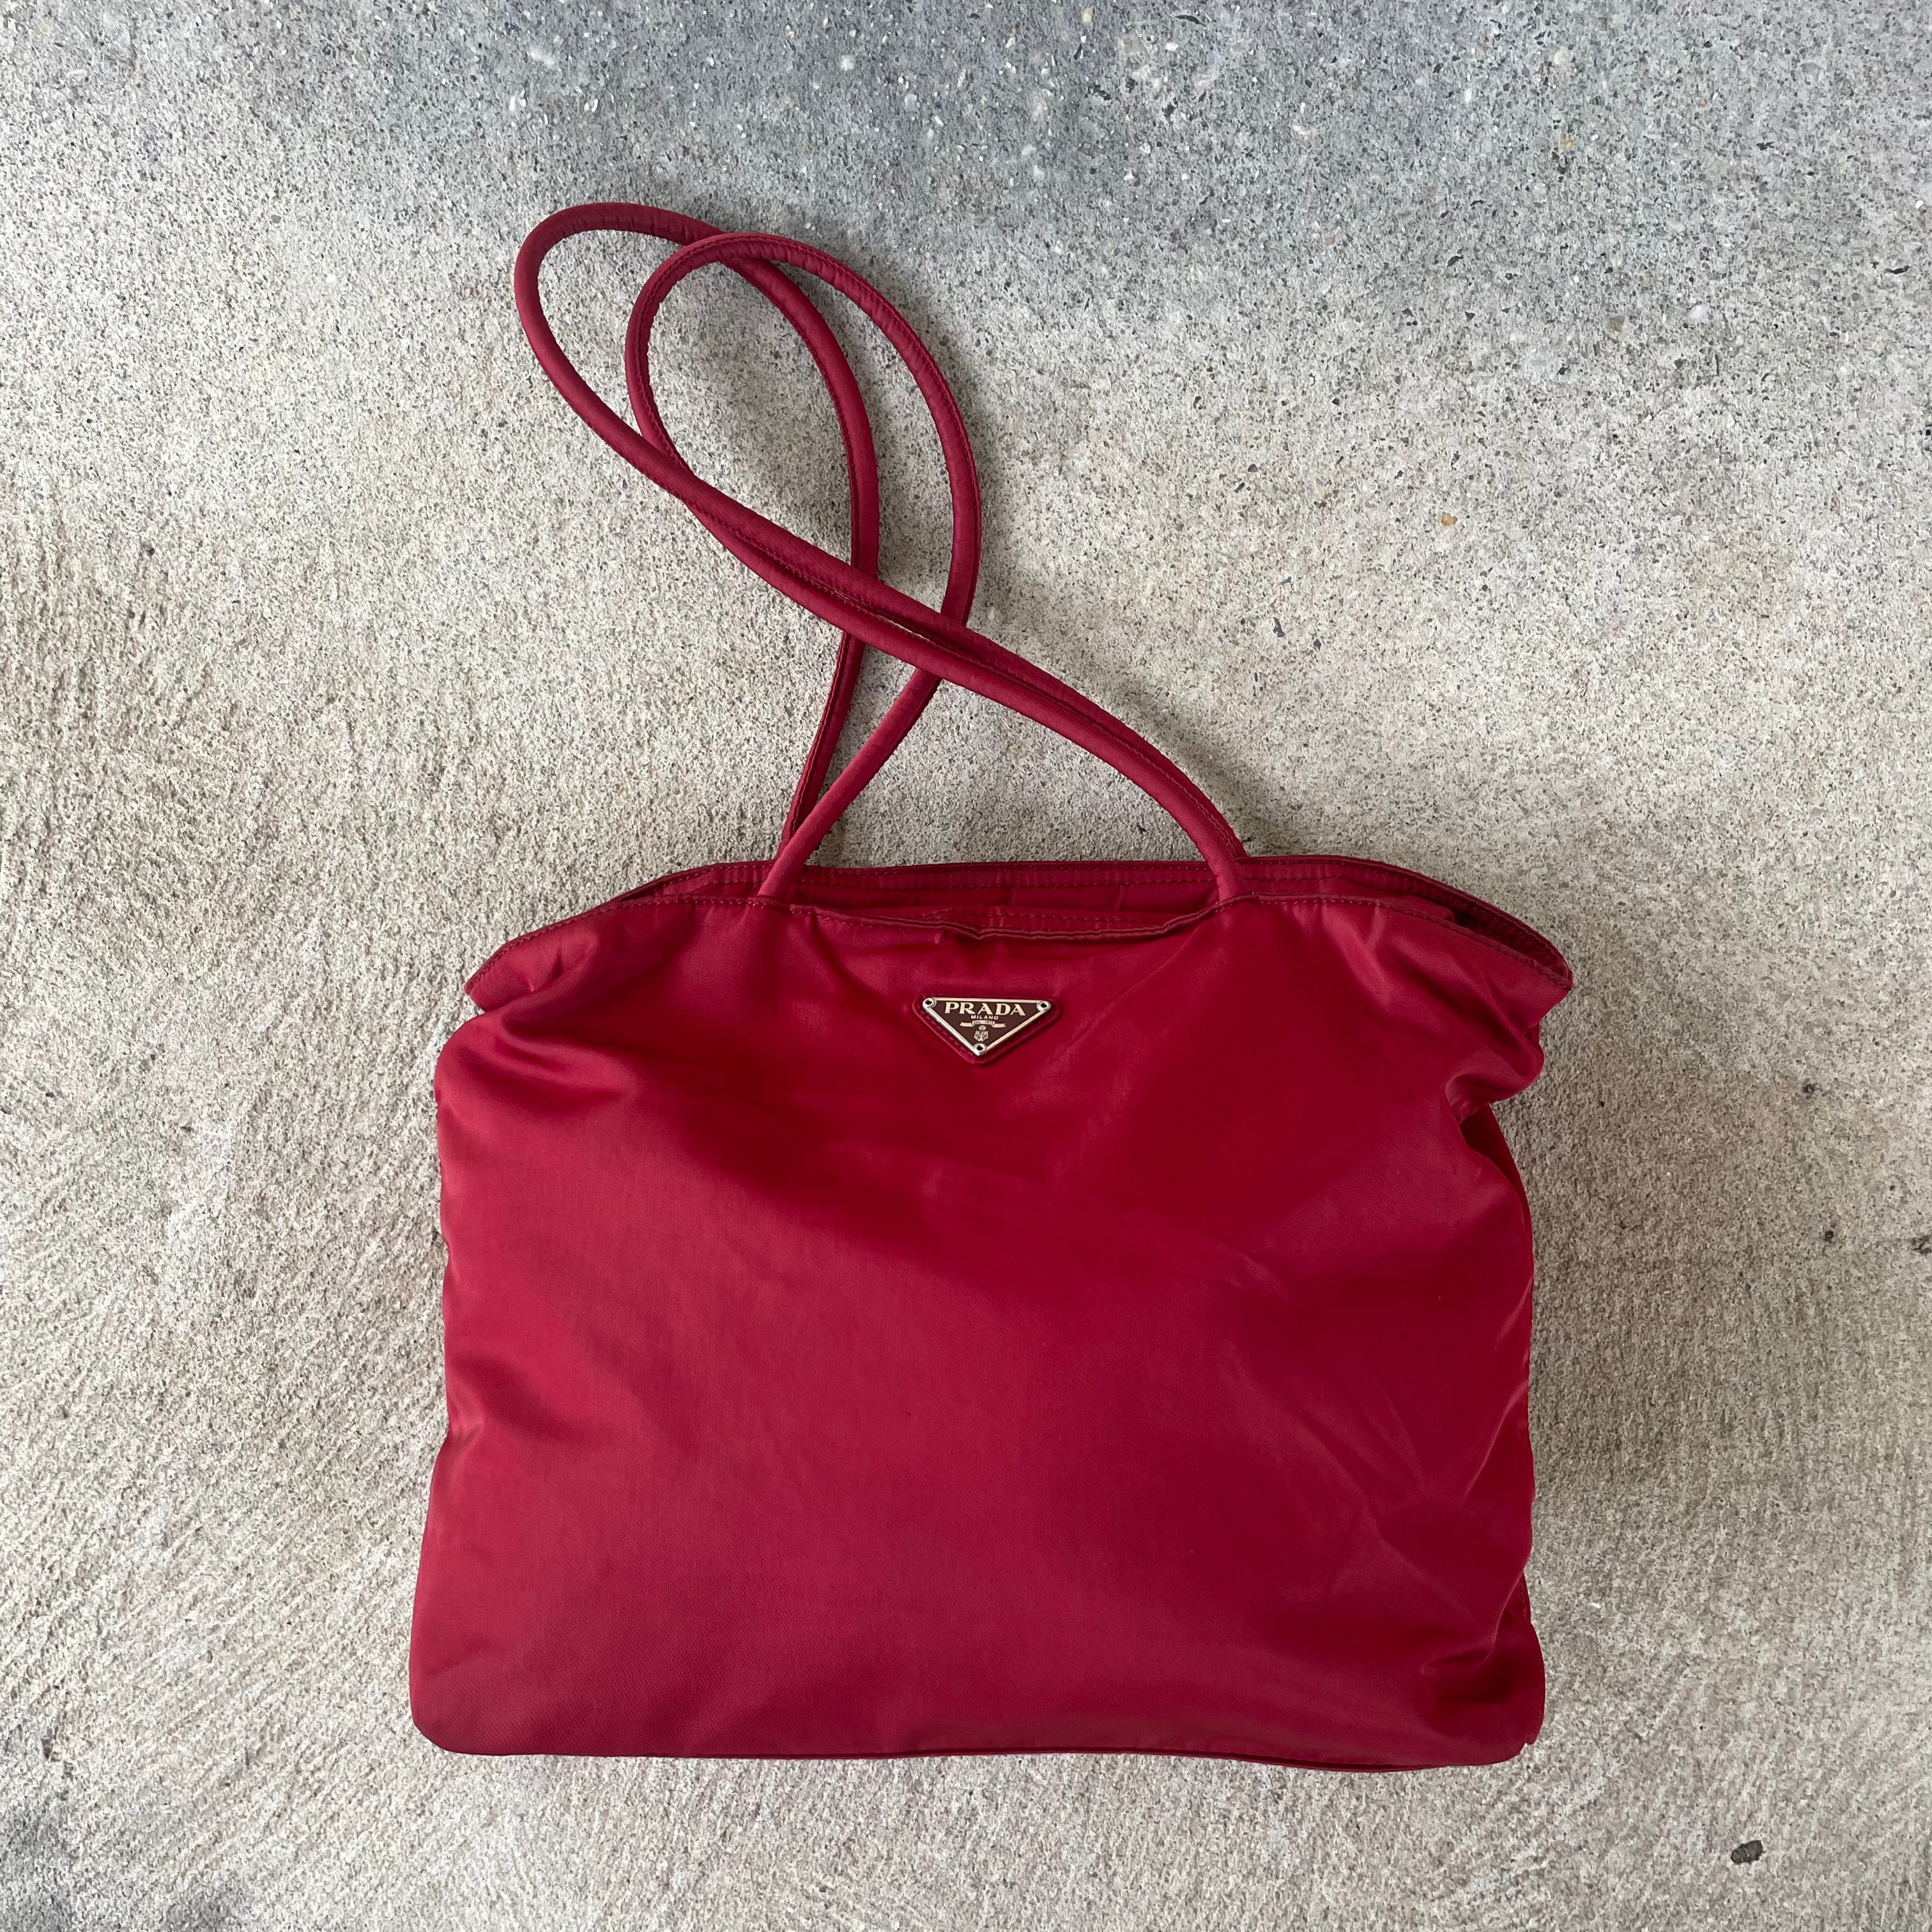 Prada Nylon Red Tote Bag – Curated by Charbel